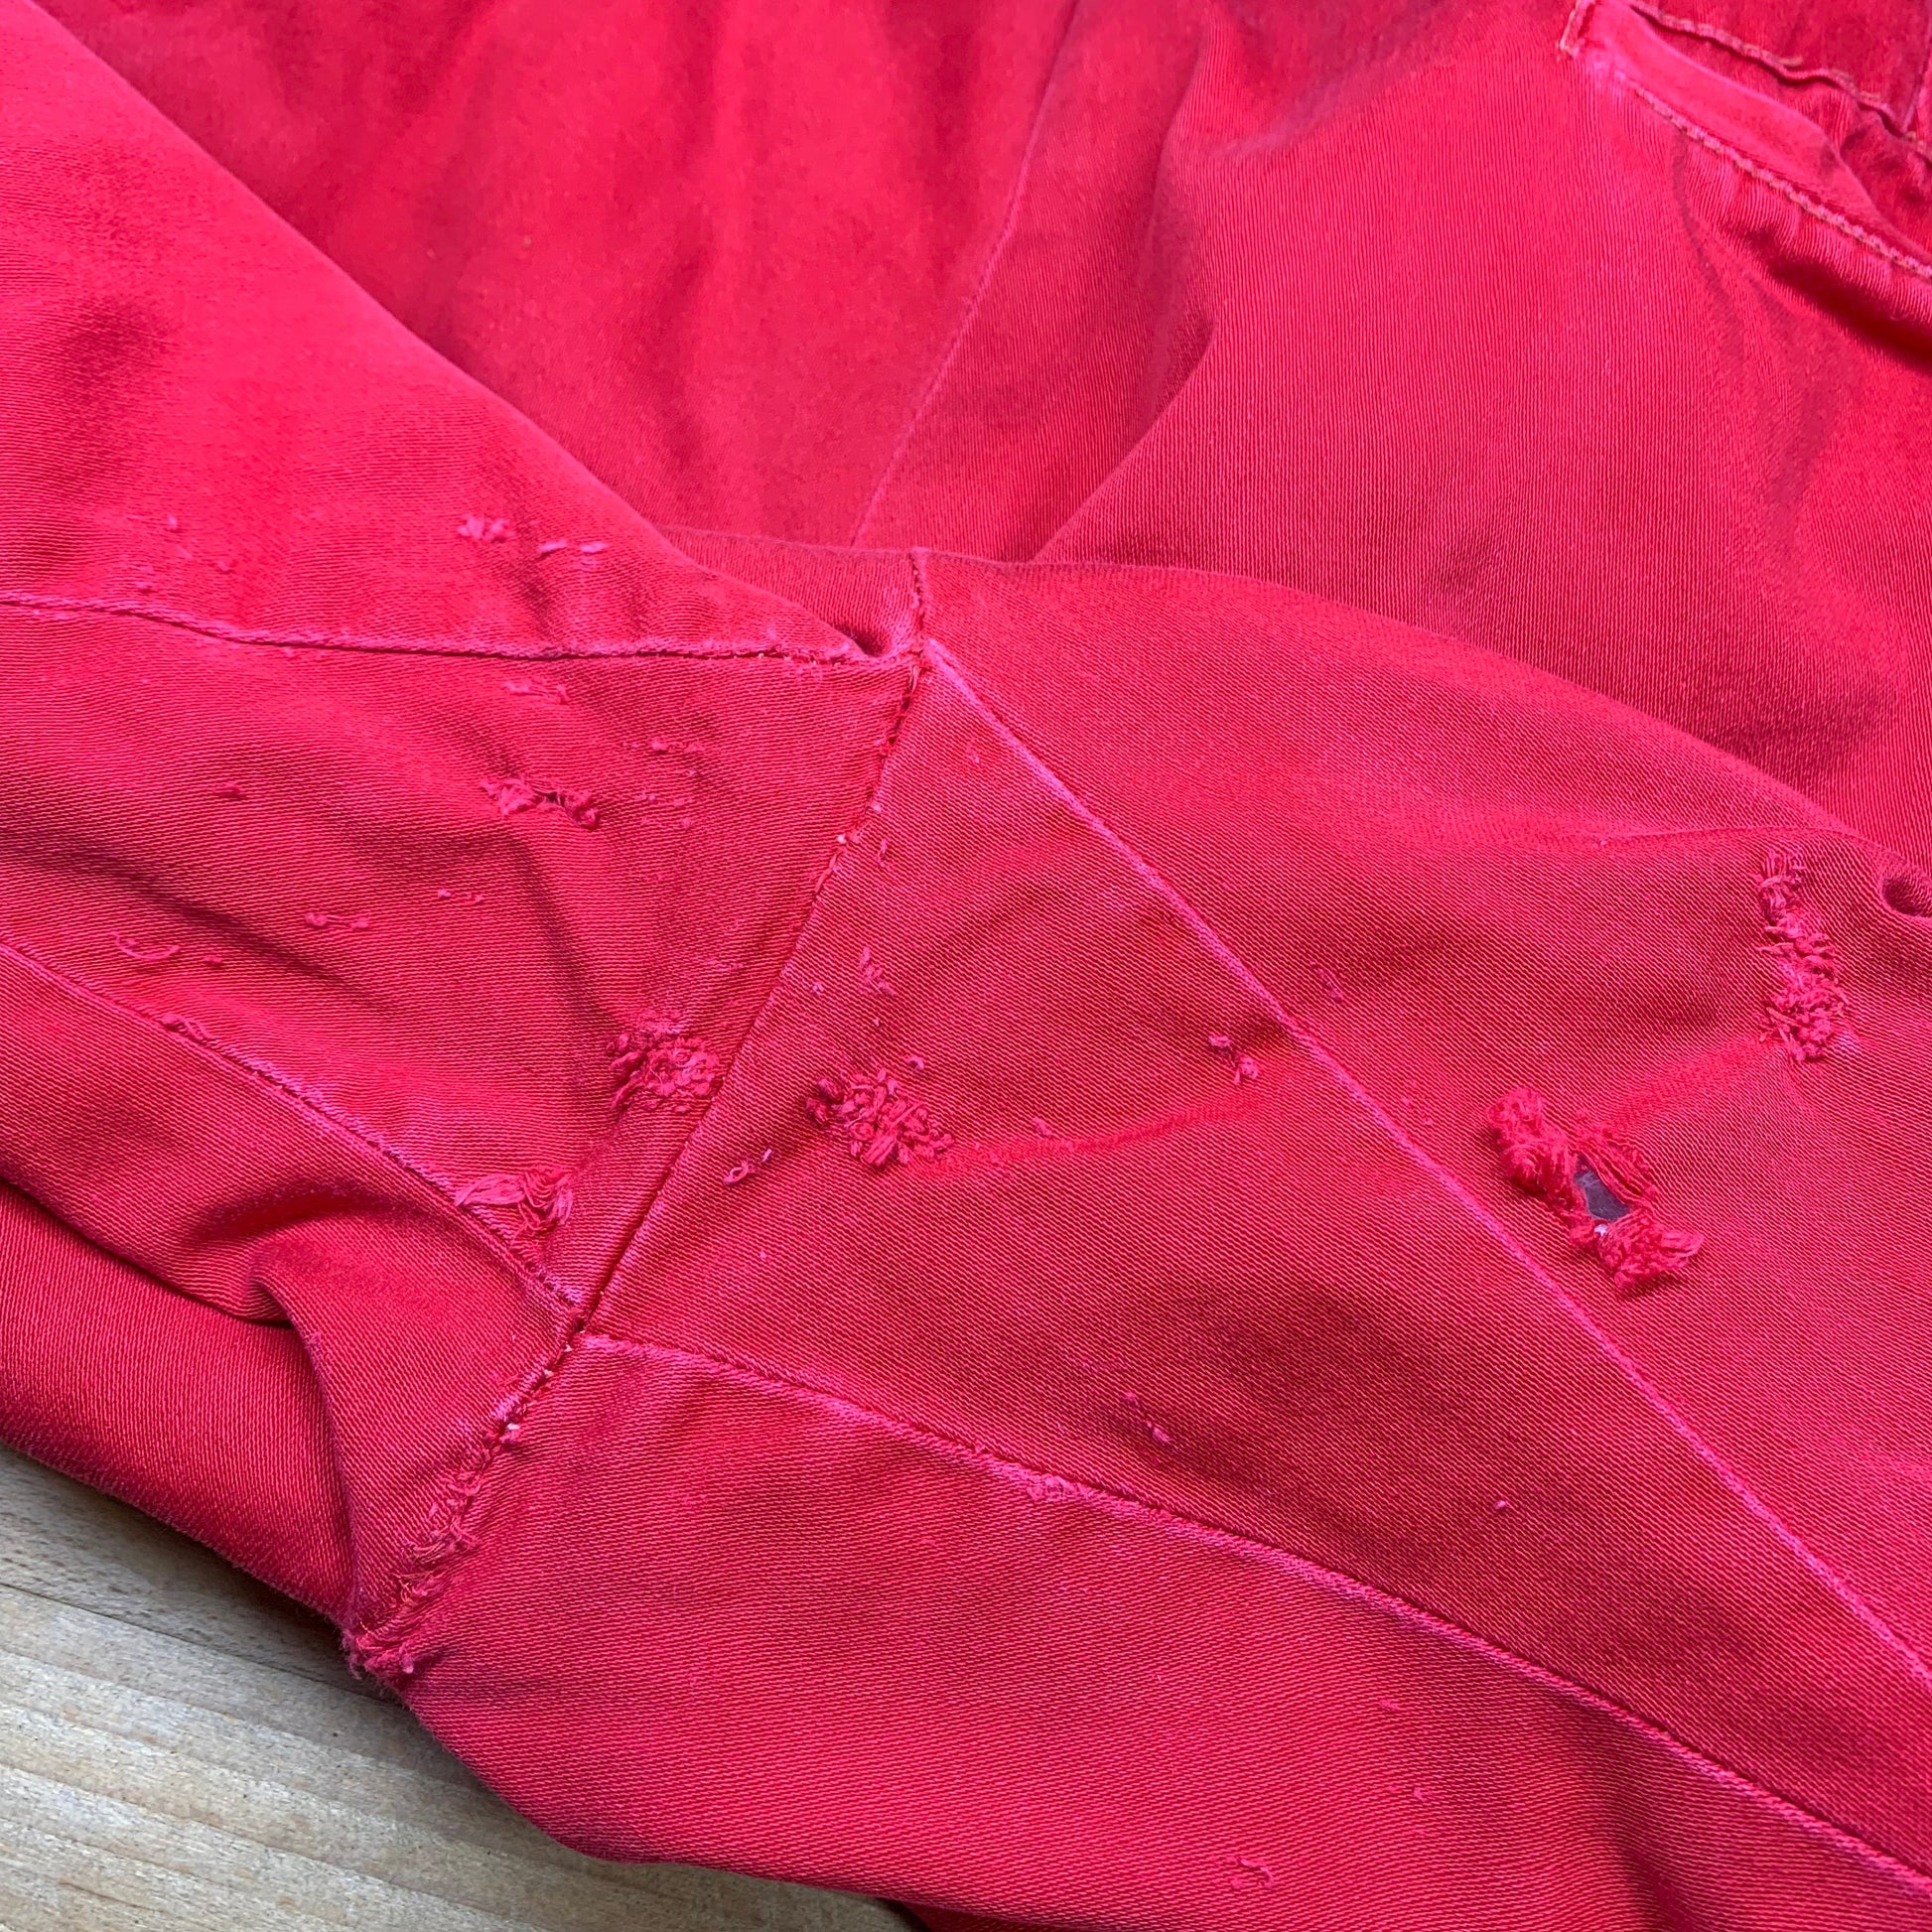 70s Red High Waisted Hunting Pants - Men's Medium, Women's Large, 31" 